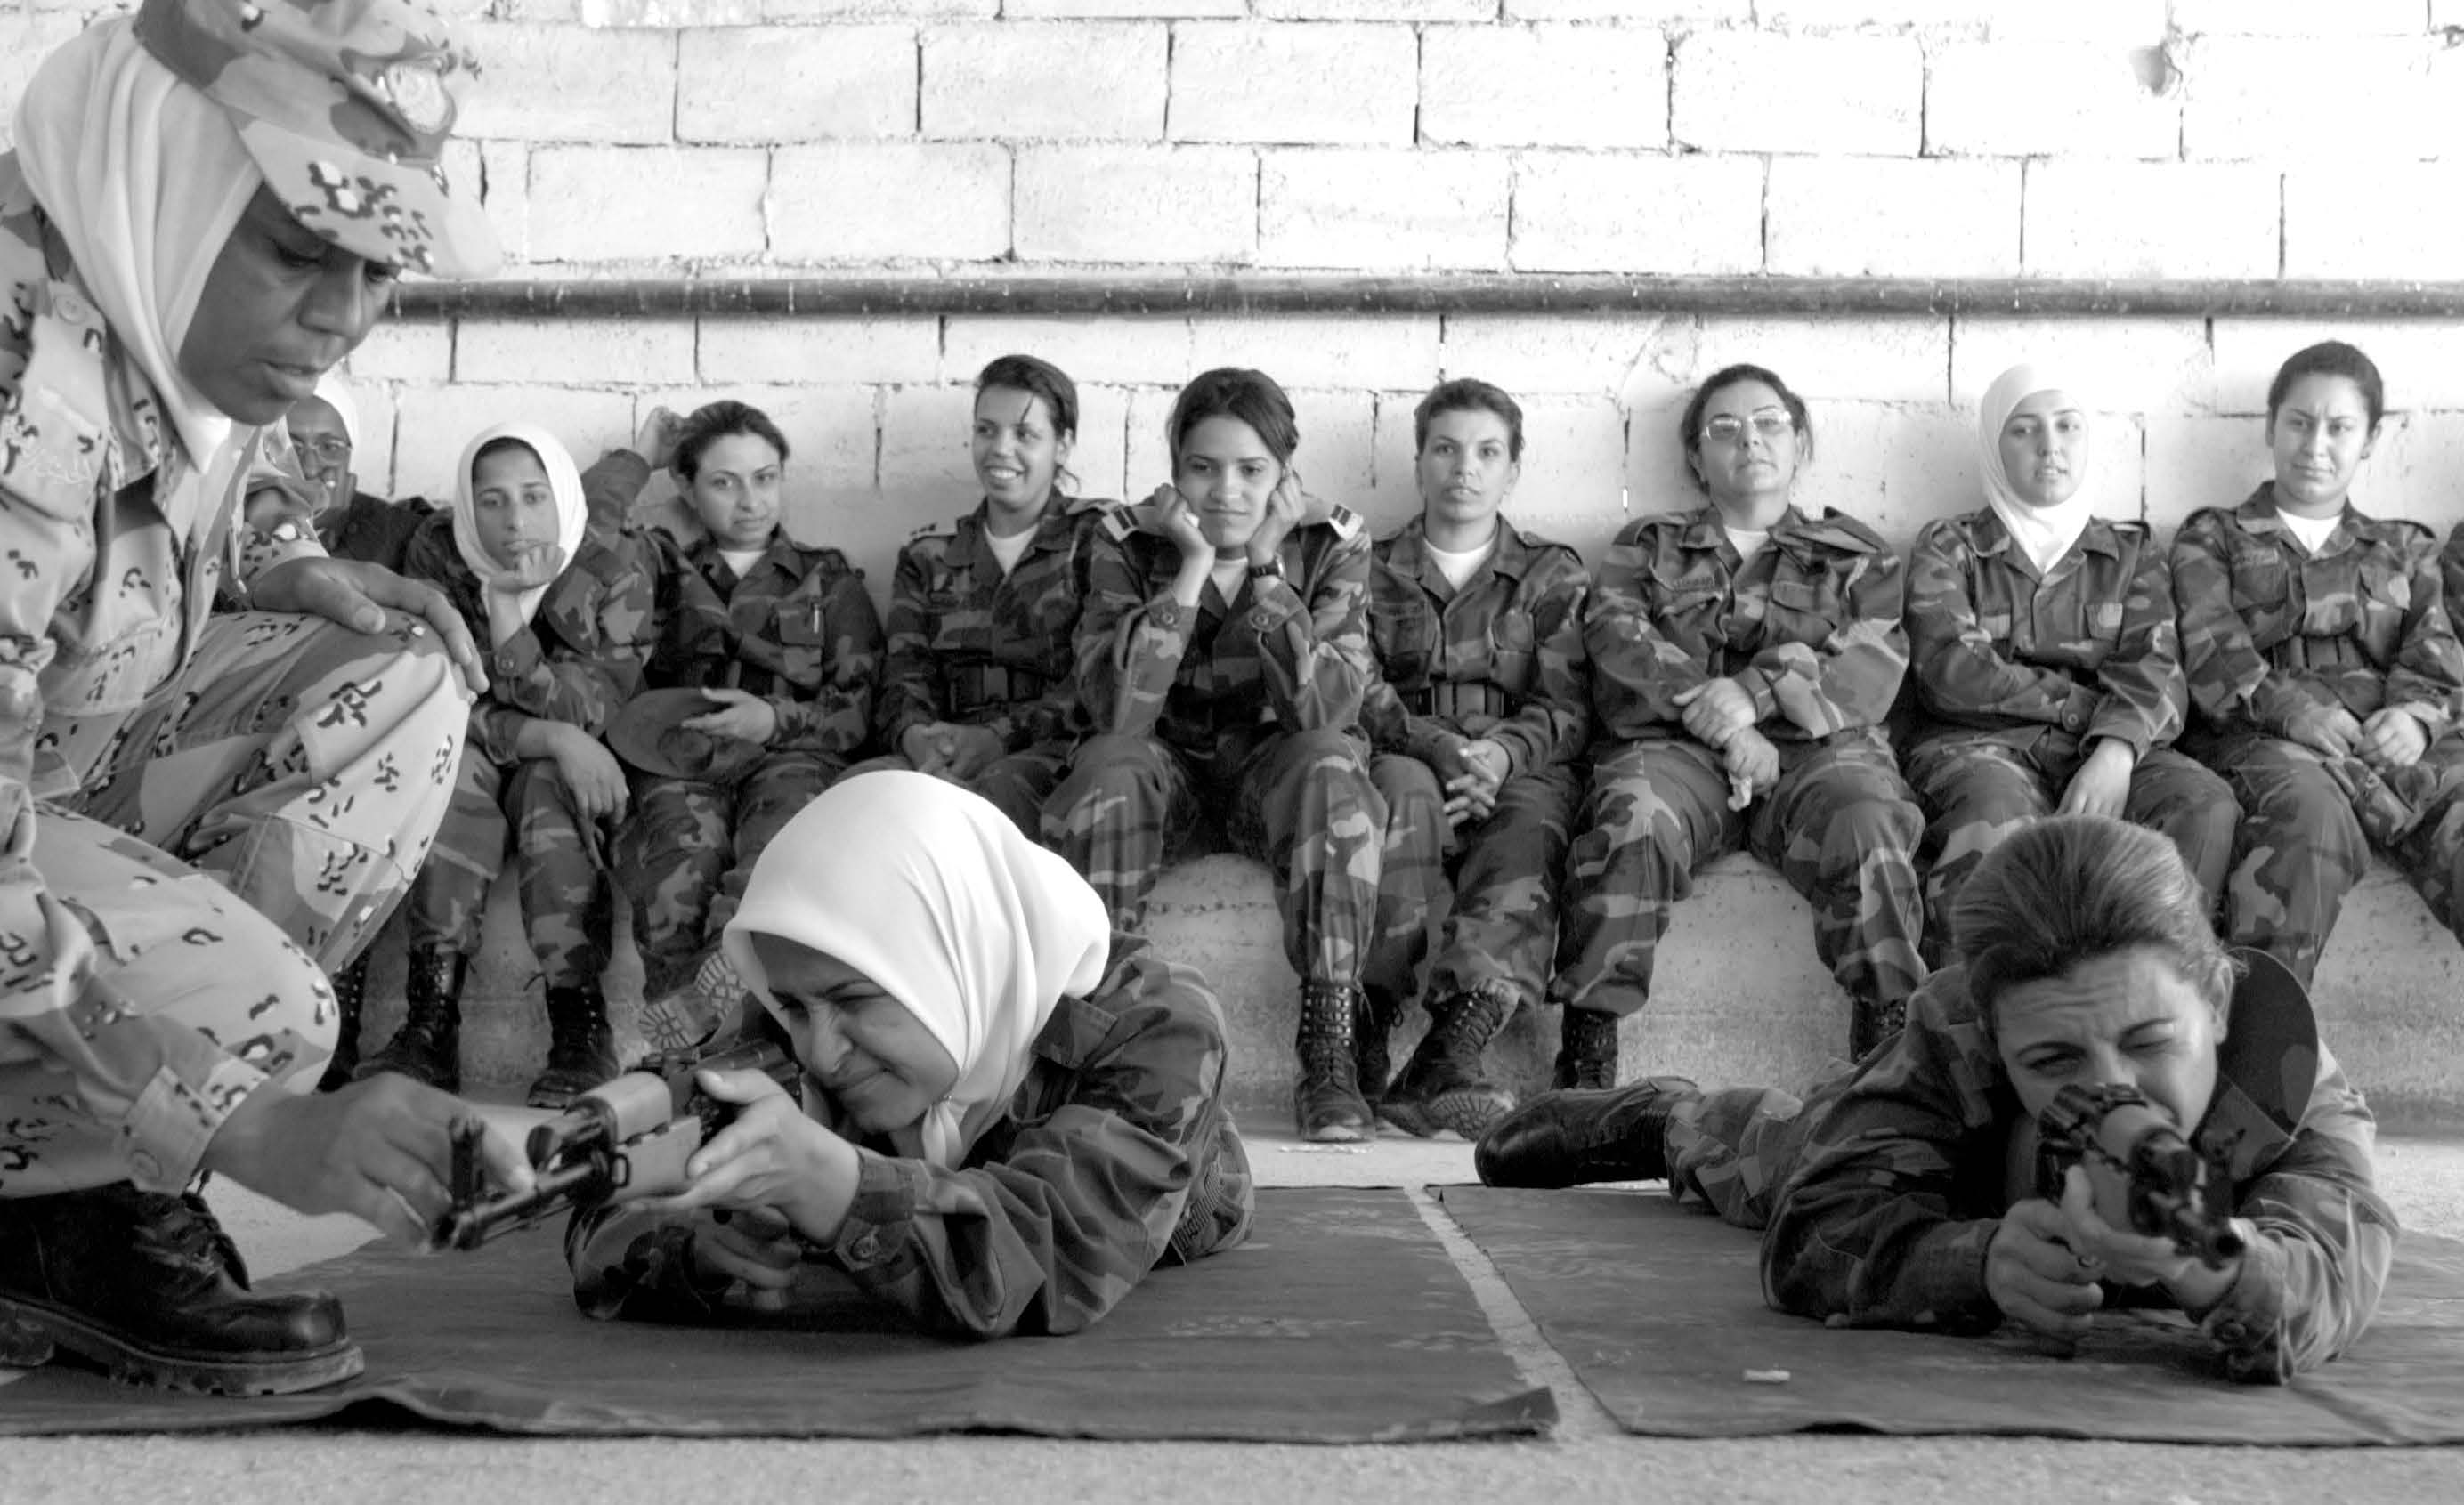 A Jordanian warrant officer instructs female trainees from the Iraqi army on proper techniques while firing an AK-47 as part of their basic training at the Jordanian Royal Military College during June 2004. Courtesy of DoD.